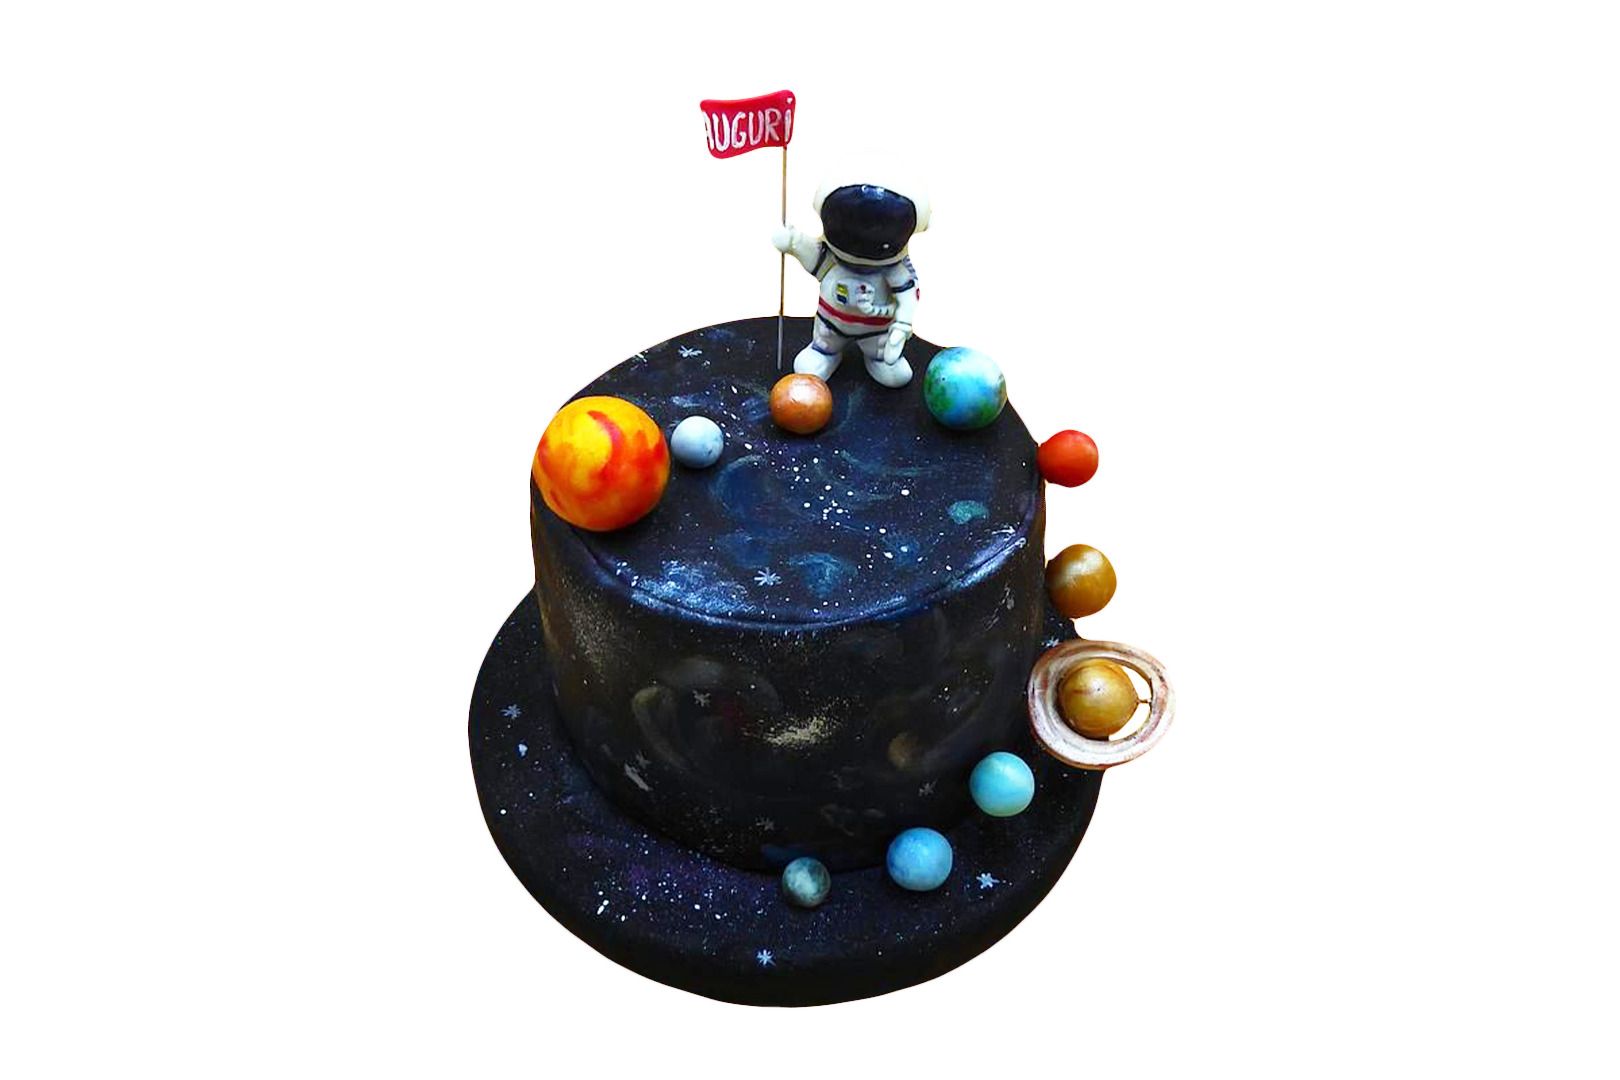 Space Rocket 6 inch | Cake Together | Birthday Cake Delivery - Cake Together